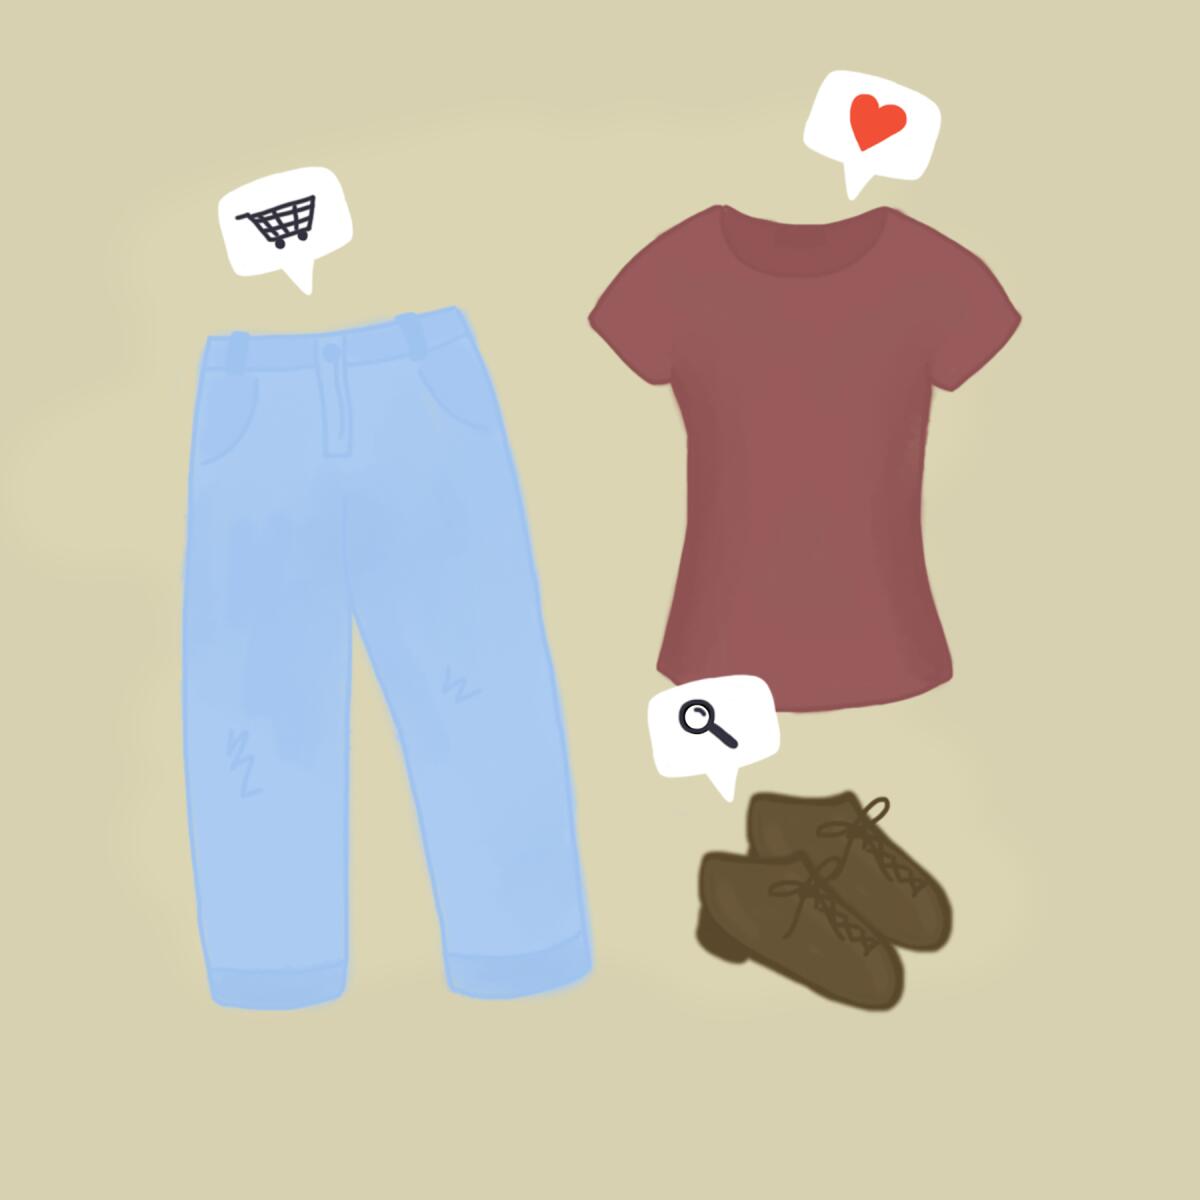 Illustration of clothing with pop-up messages on top showing a shopping cart, a heart and a search icon.